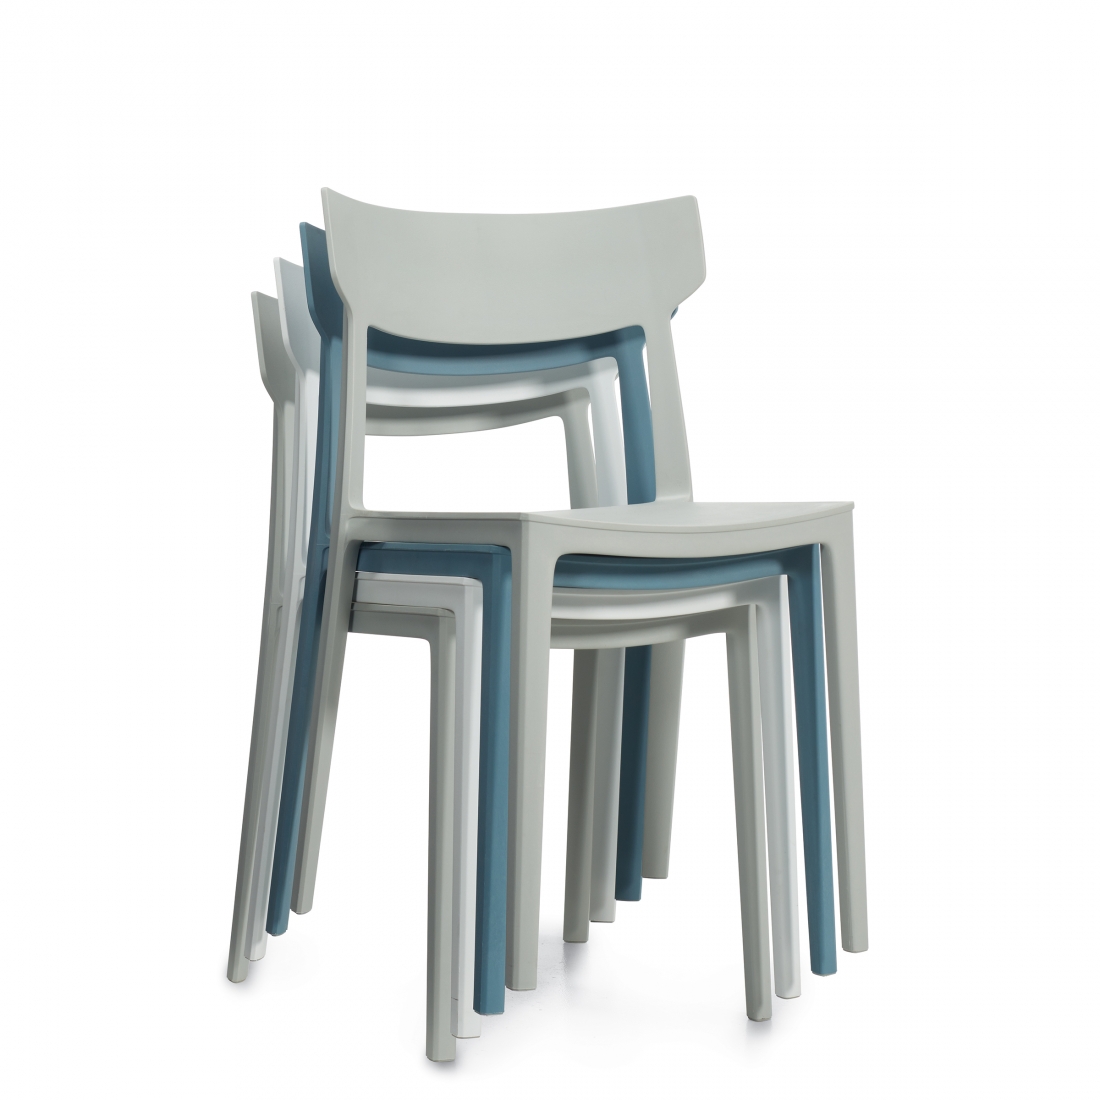 Kylie | Multi-Purpose Stacking Chair - White